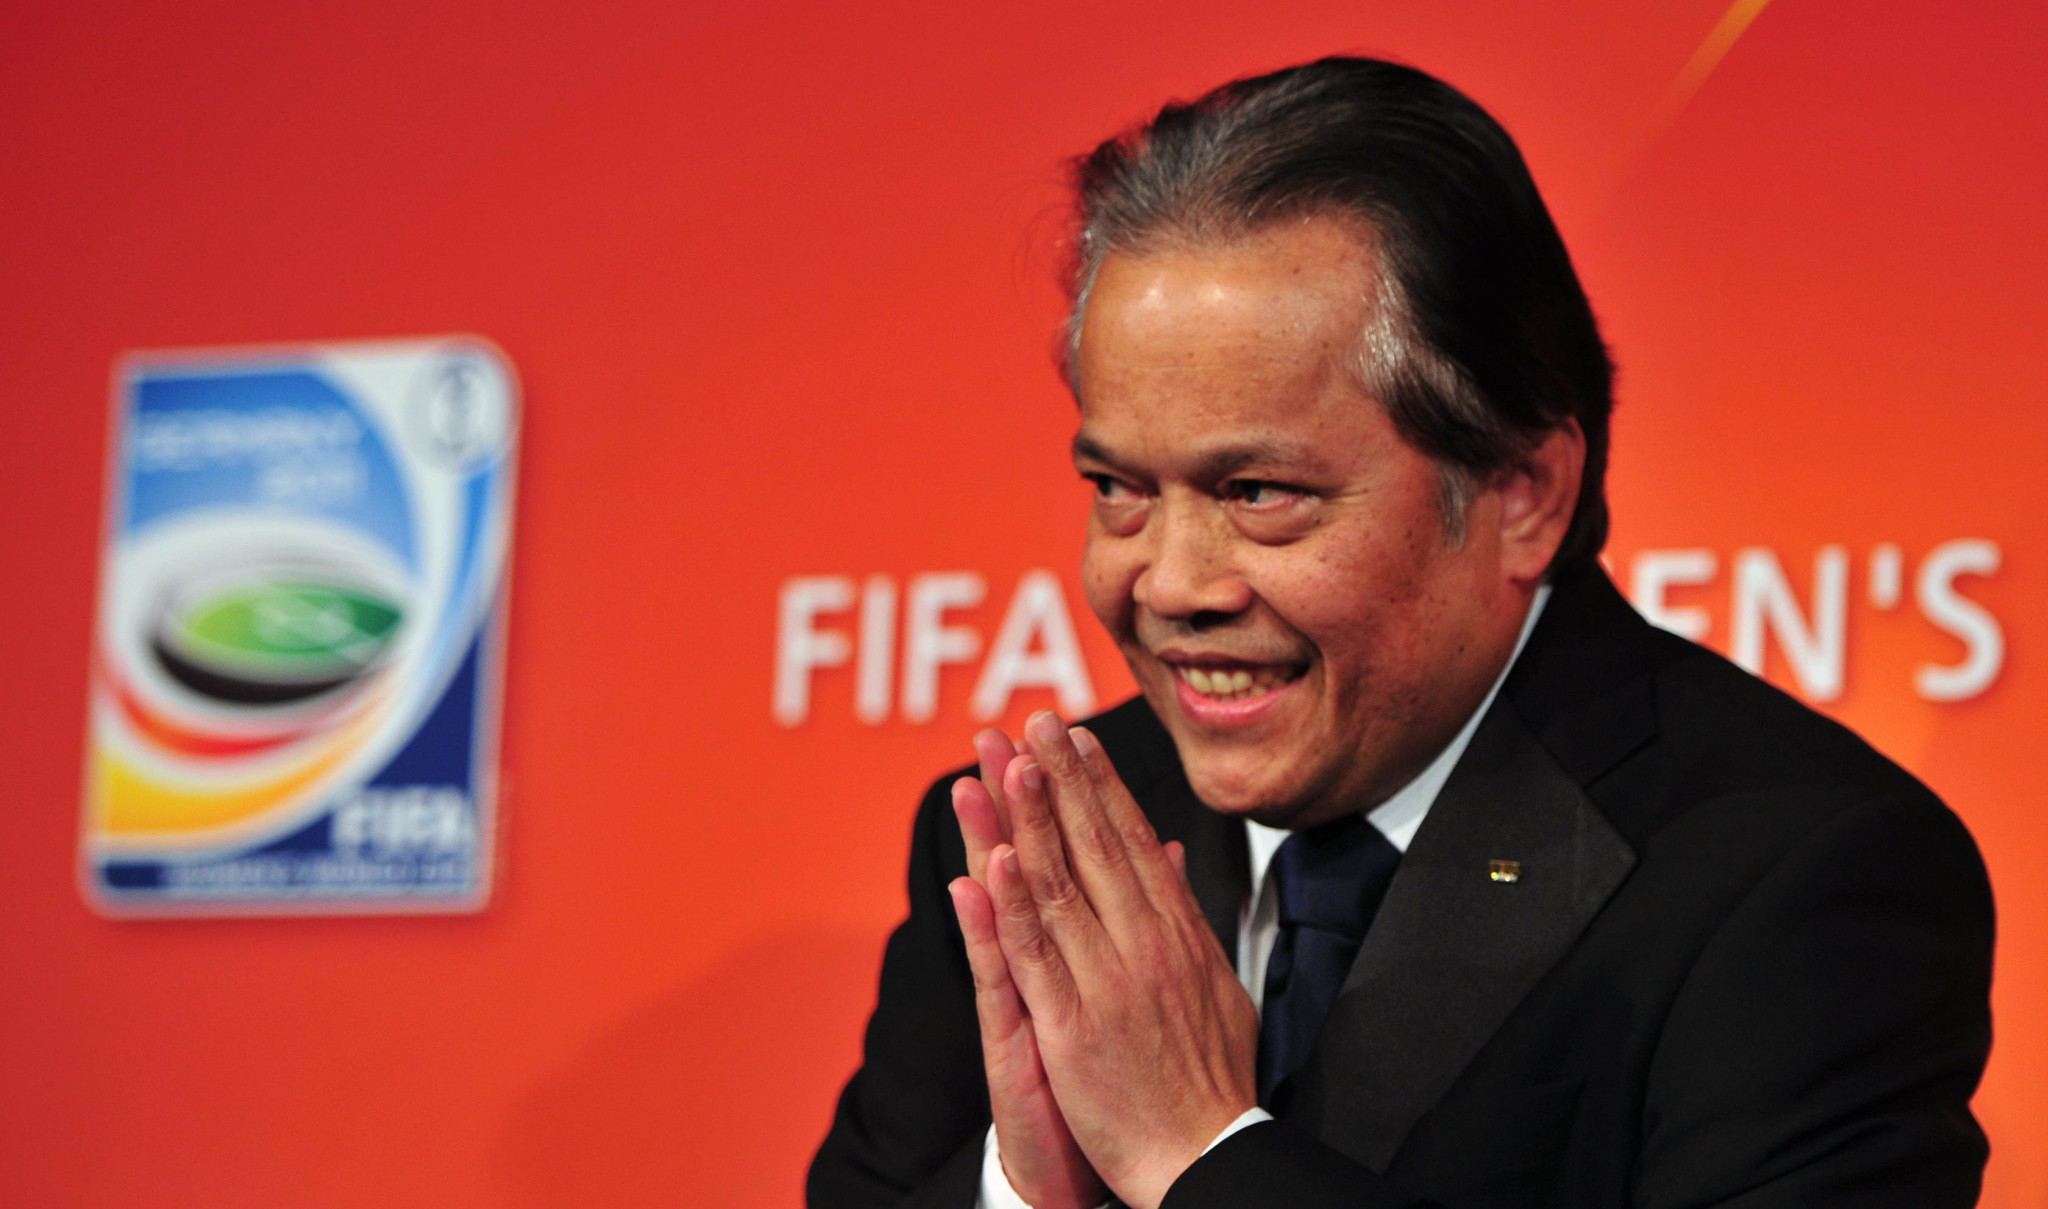 A three-and-a-half year ban imposed by FIFA on Thailand's Worawi Makudi has been lifted by the Court of Arbitration for Sport ©Getty Images